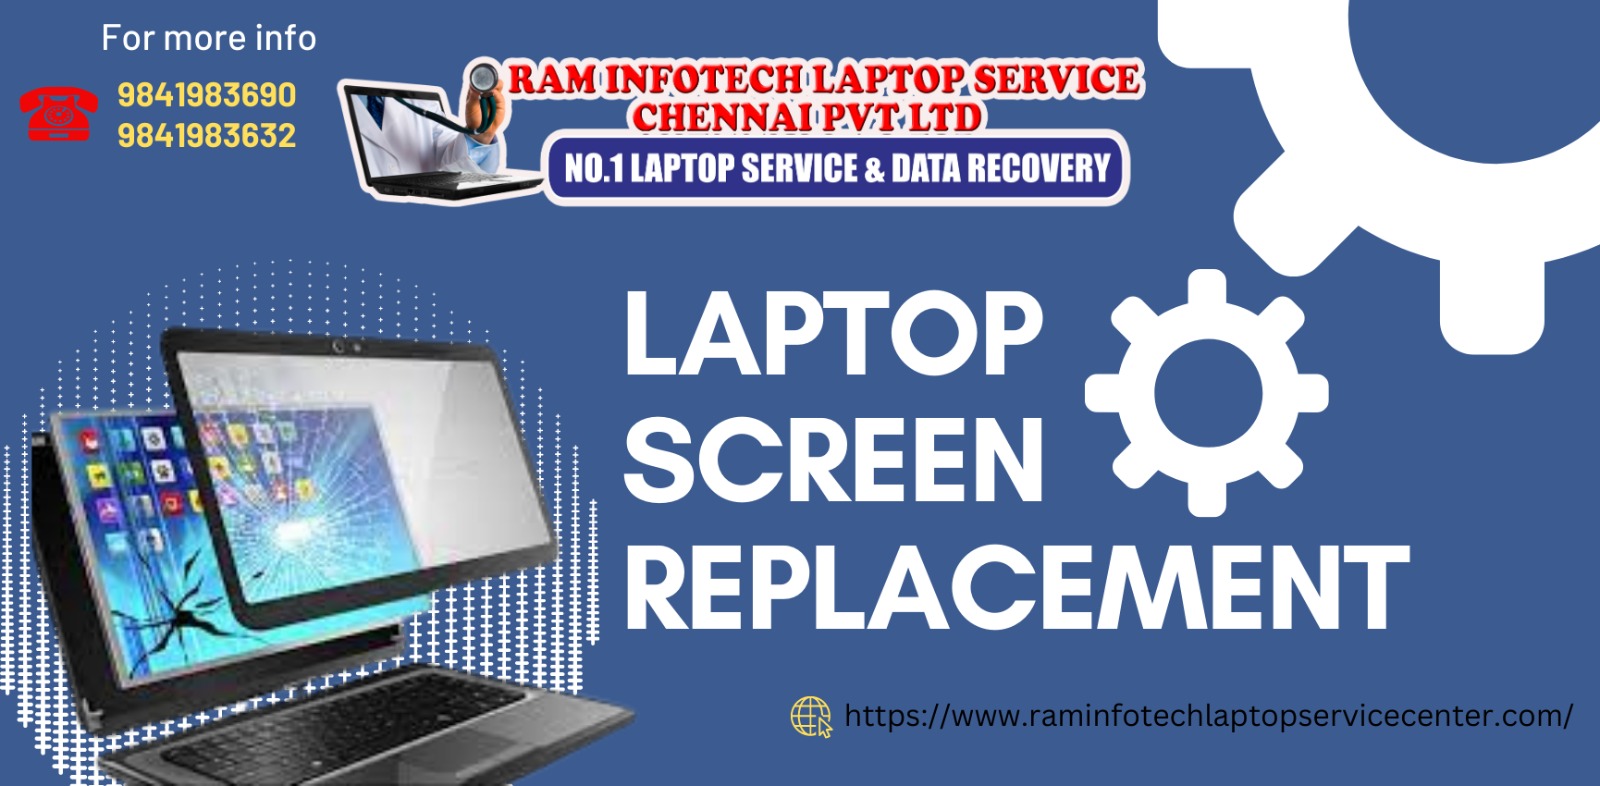 Best Quality Screen Only At raminfotech doorstep